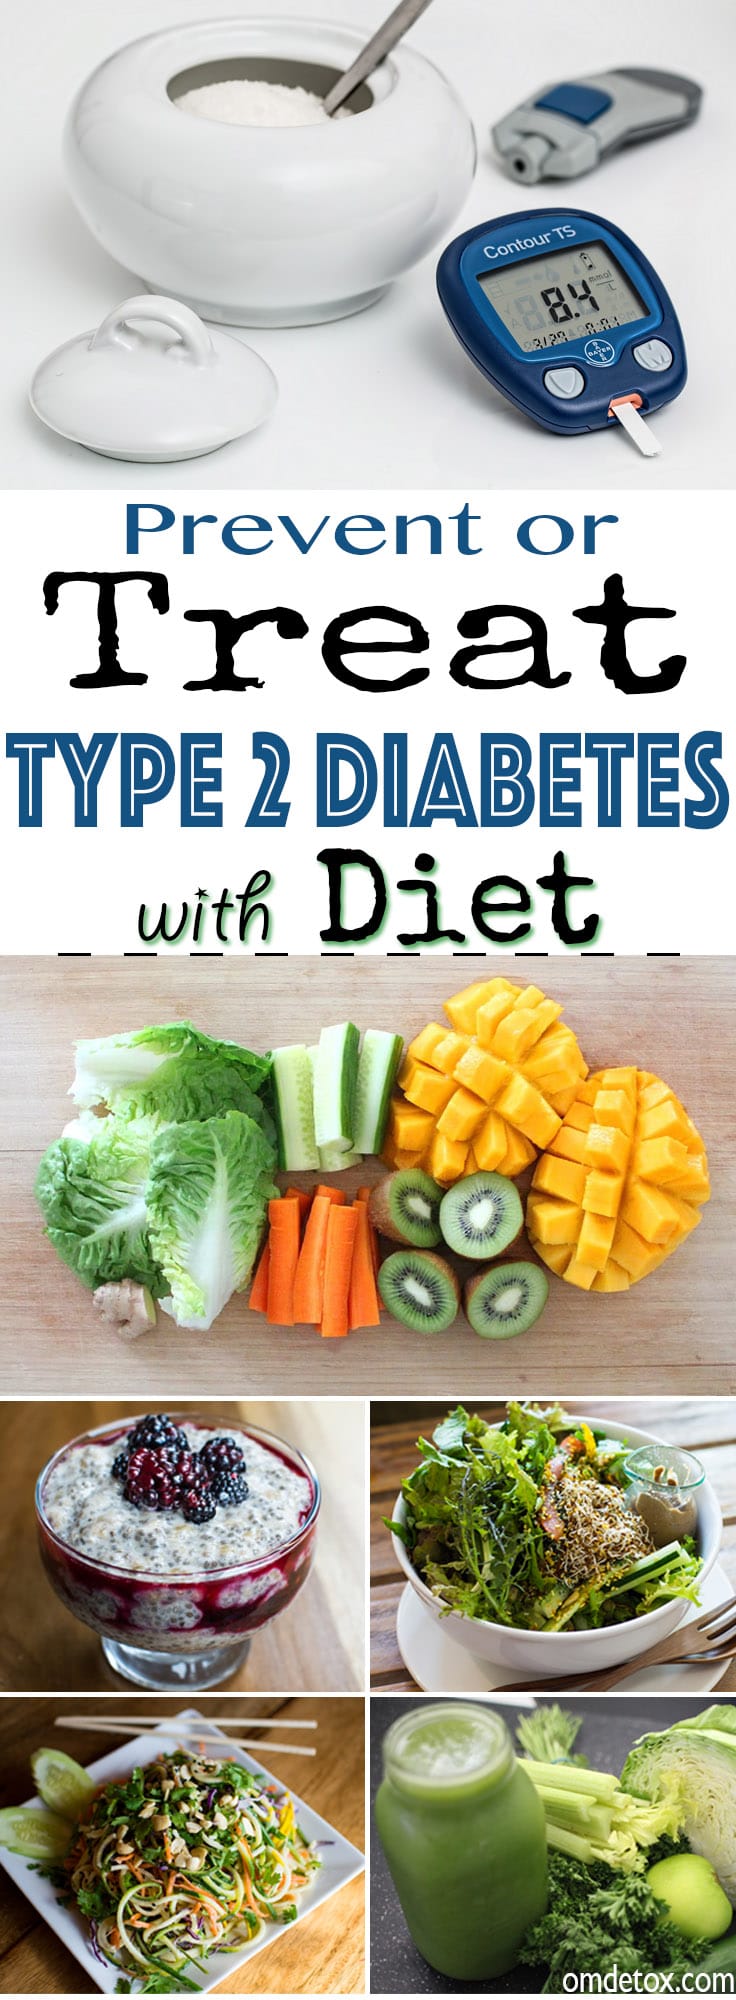 treating-type-2-diabetes-with-diet-control-your-diabetes-with-whole-foods